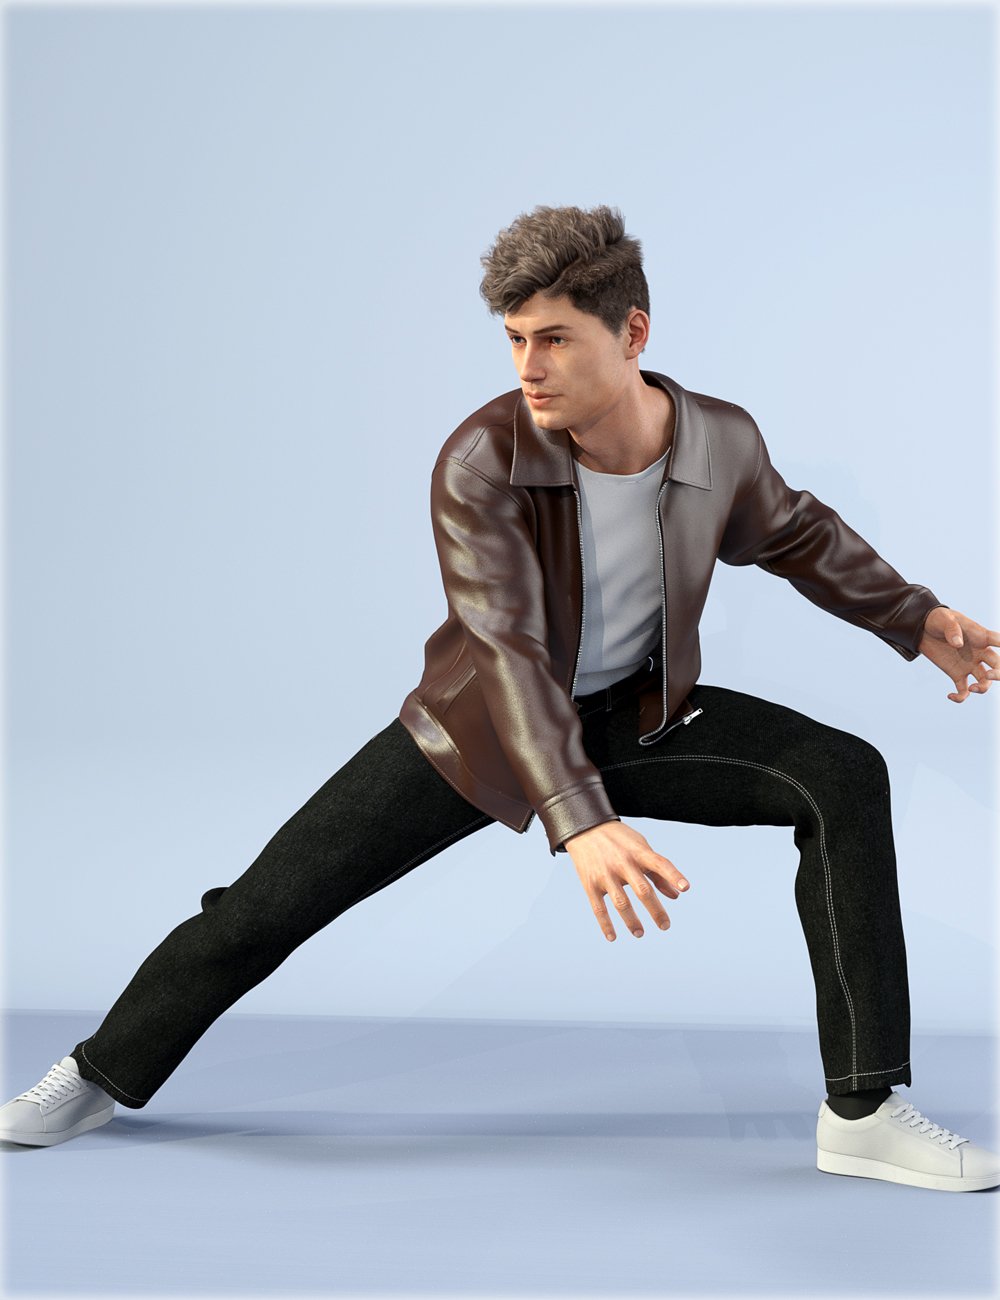 dForce HnC Leather Jacket Outfit for Genesis 8 Males by: IH Kang, 3D Models by Daz 3D